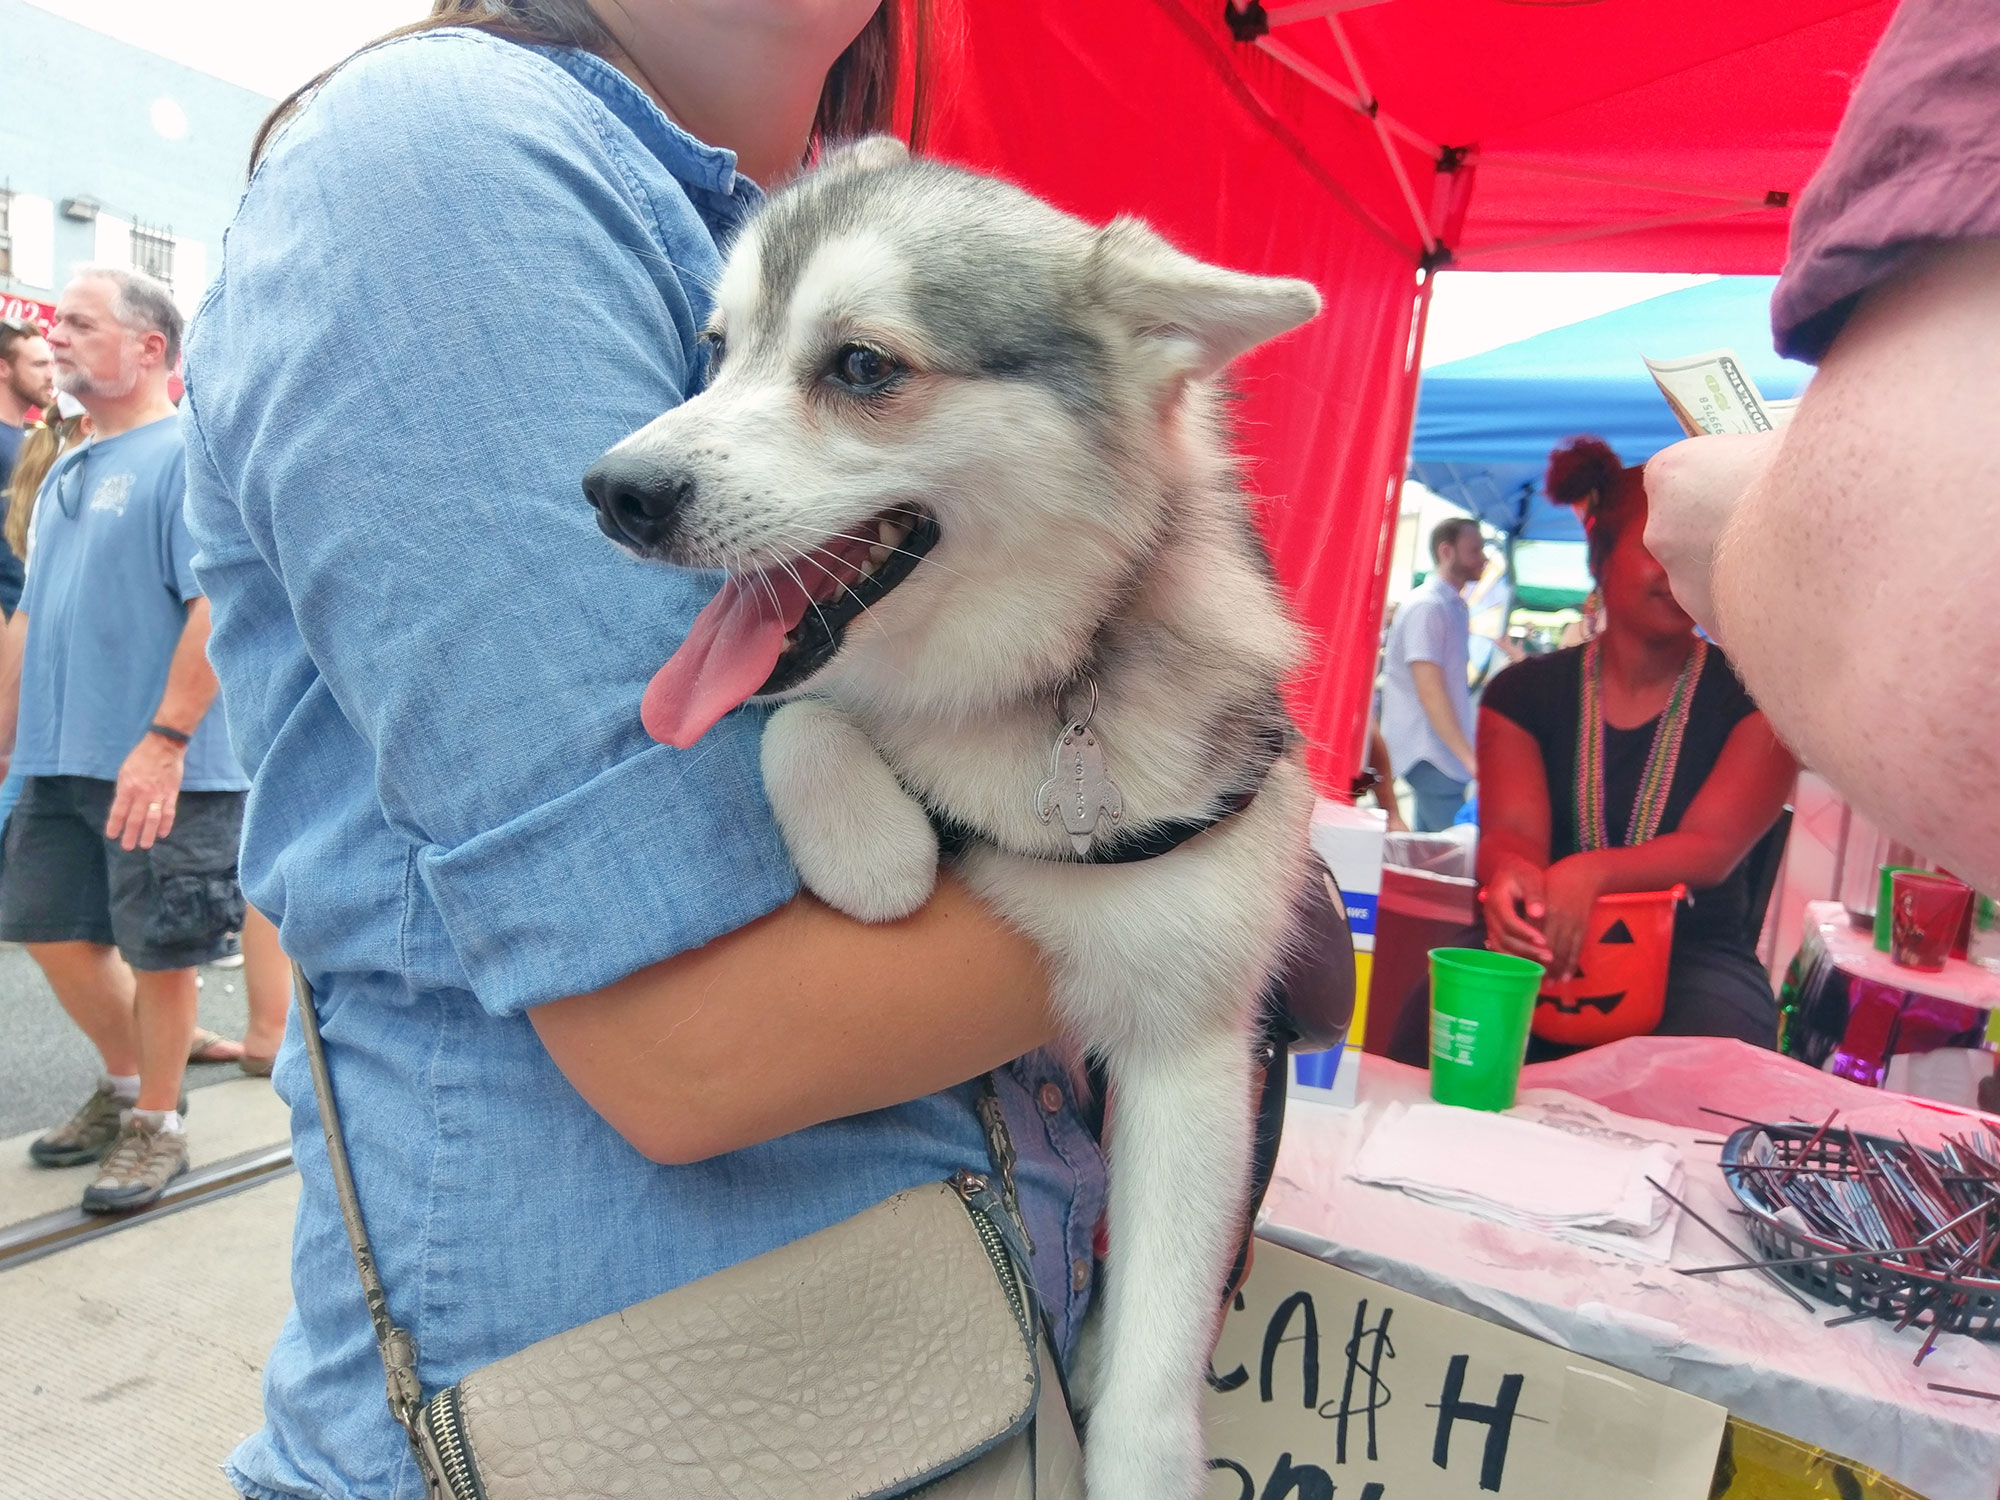 An overheated dog at the H Street Festival in D.C.